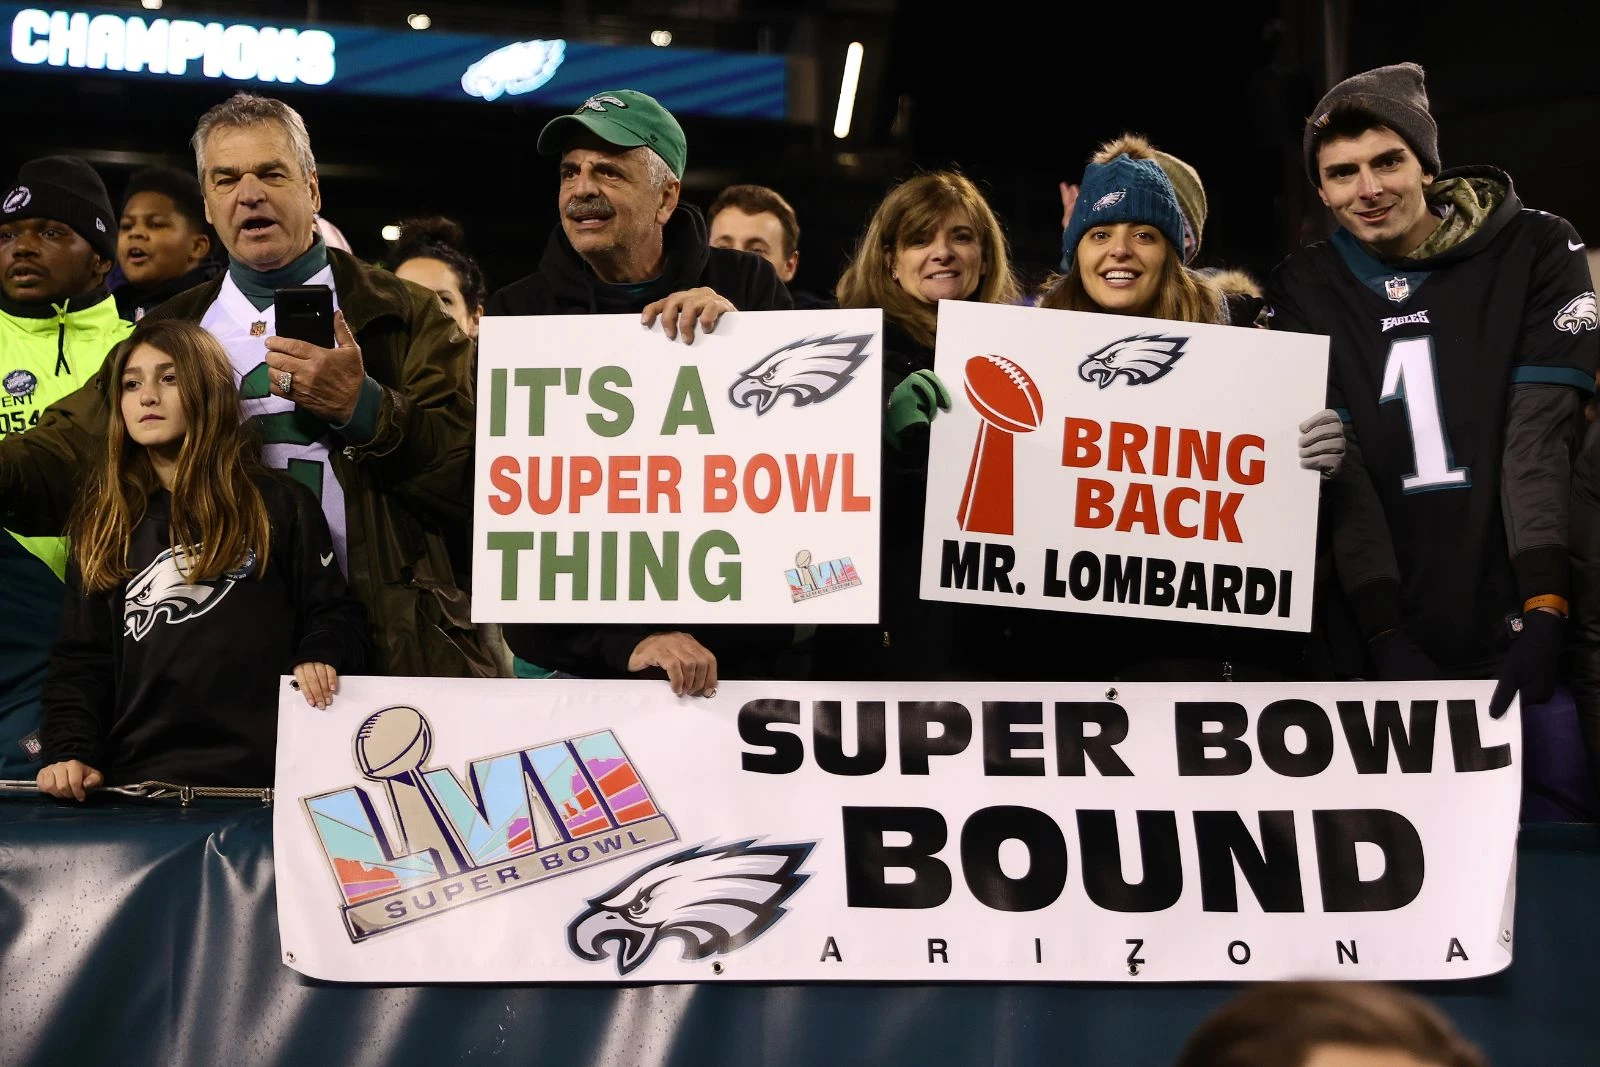 The Eagles and their Flock of fans are heading to Super Bowl LVII